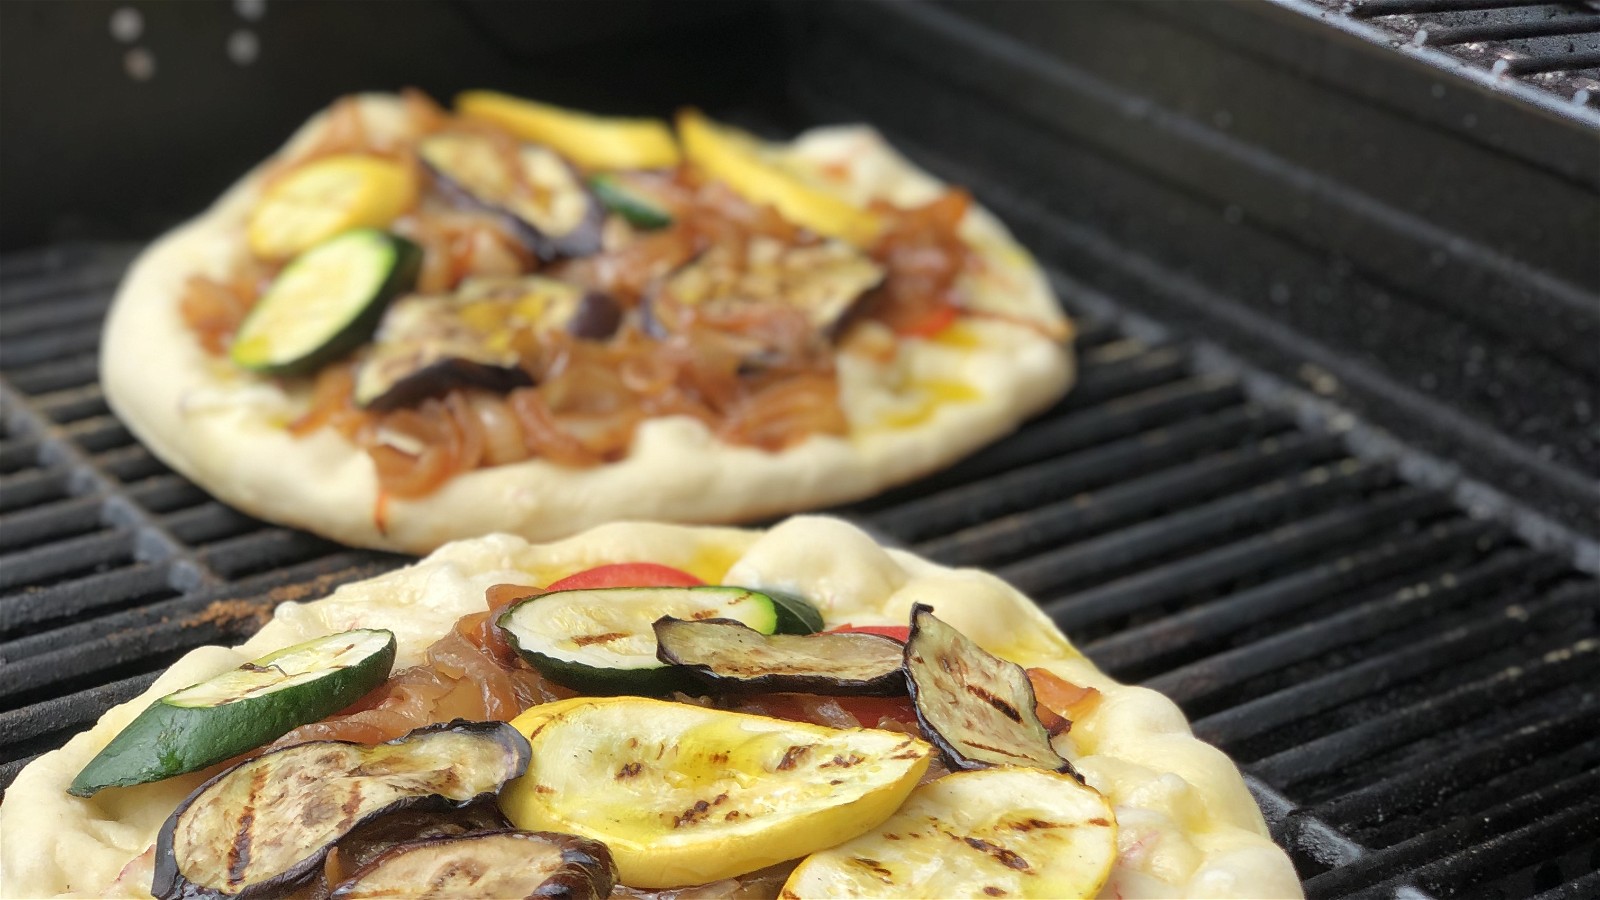 Image of Grilled Pizza